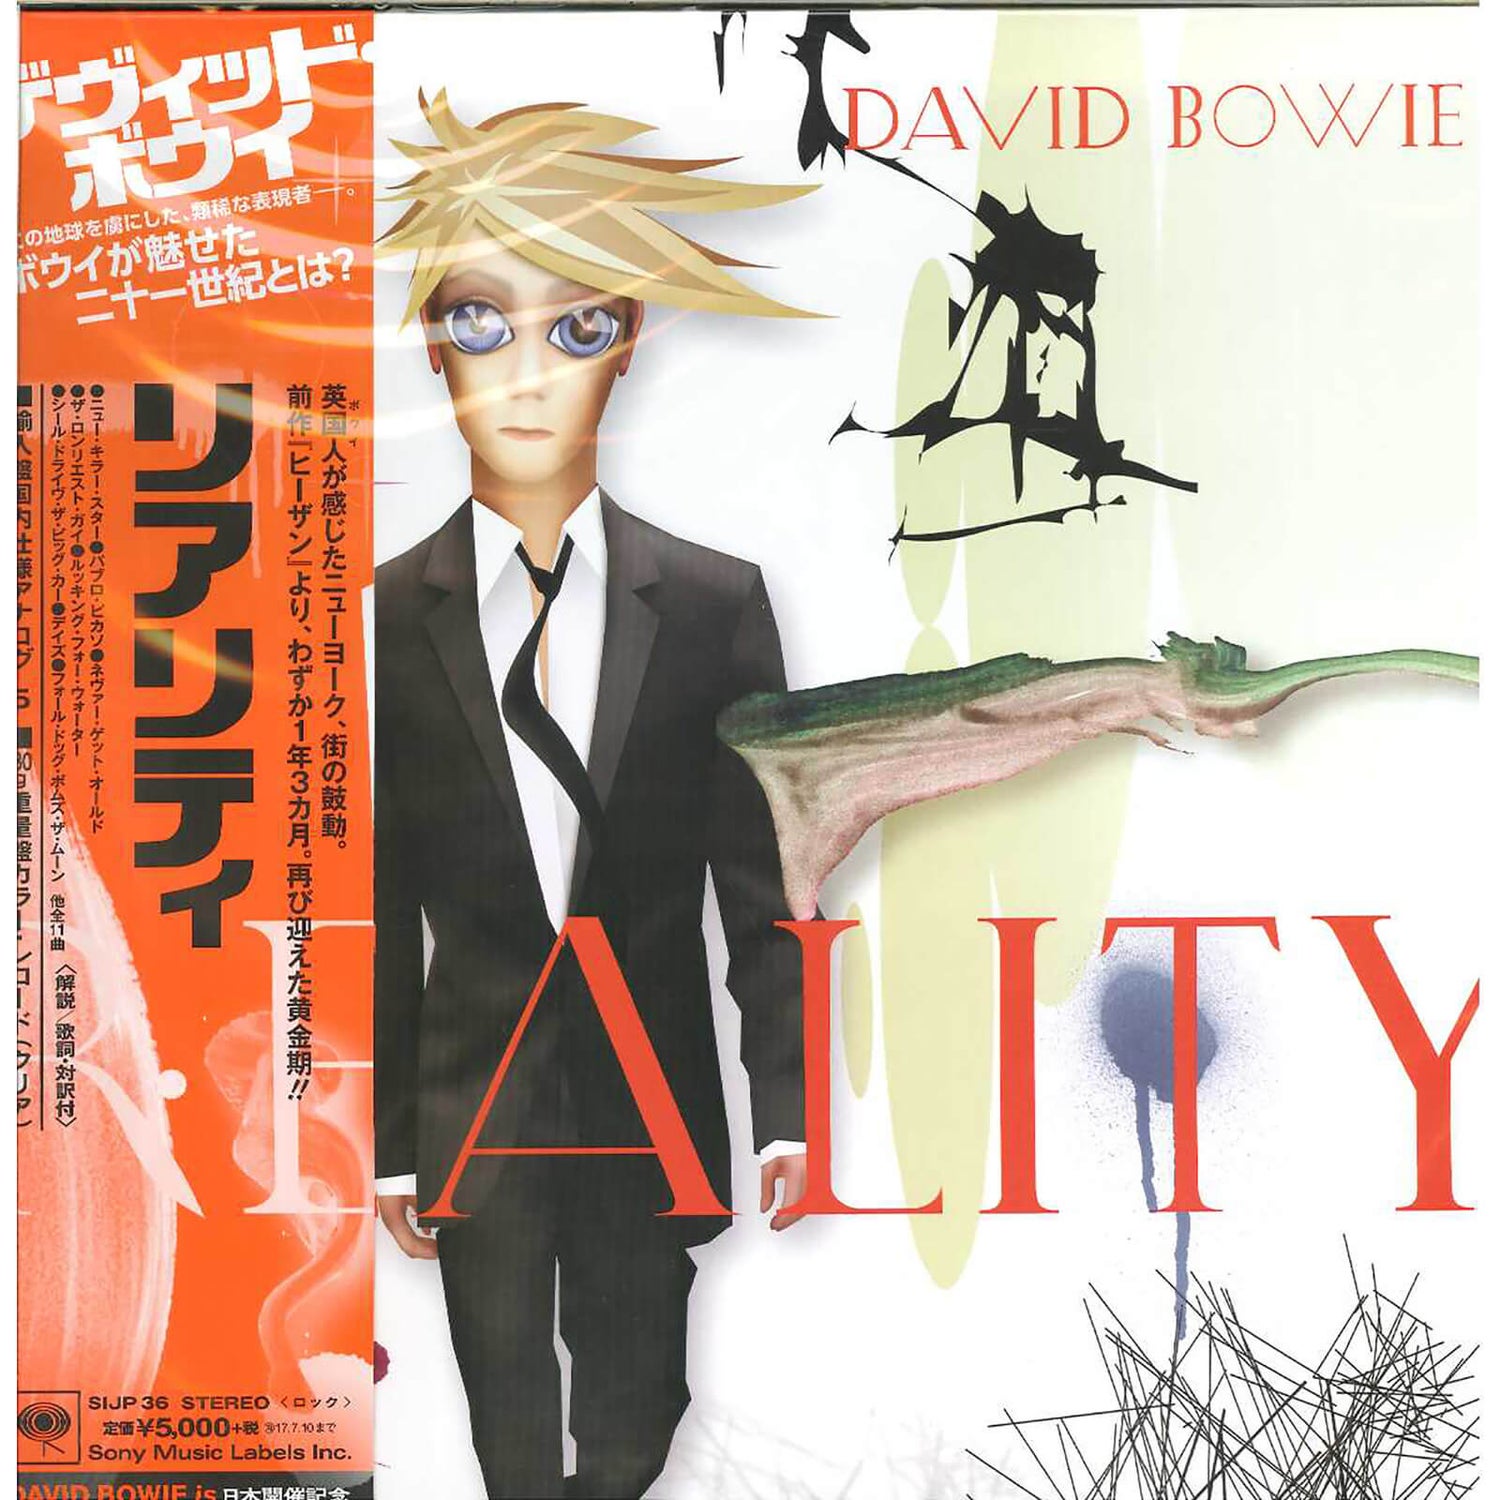 David Bowie - Reality Vinyl Japanese Edition